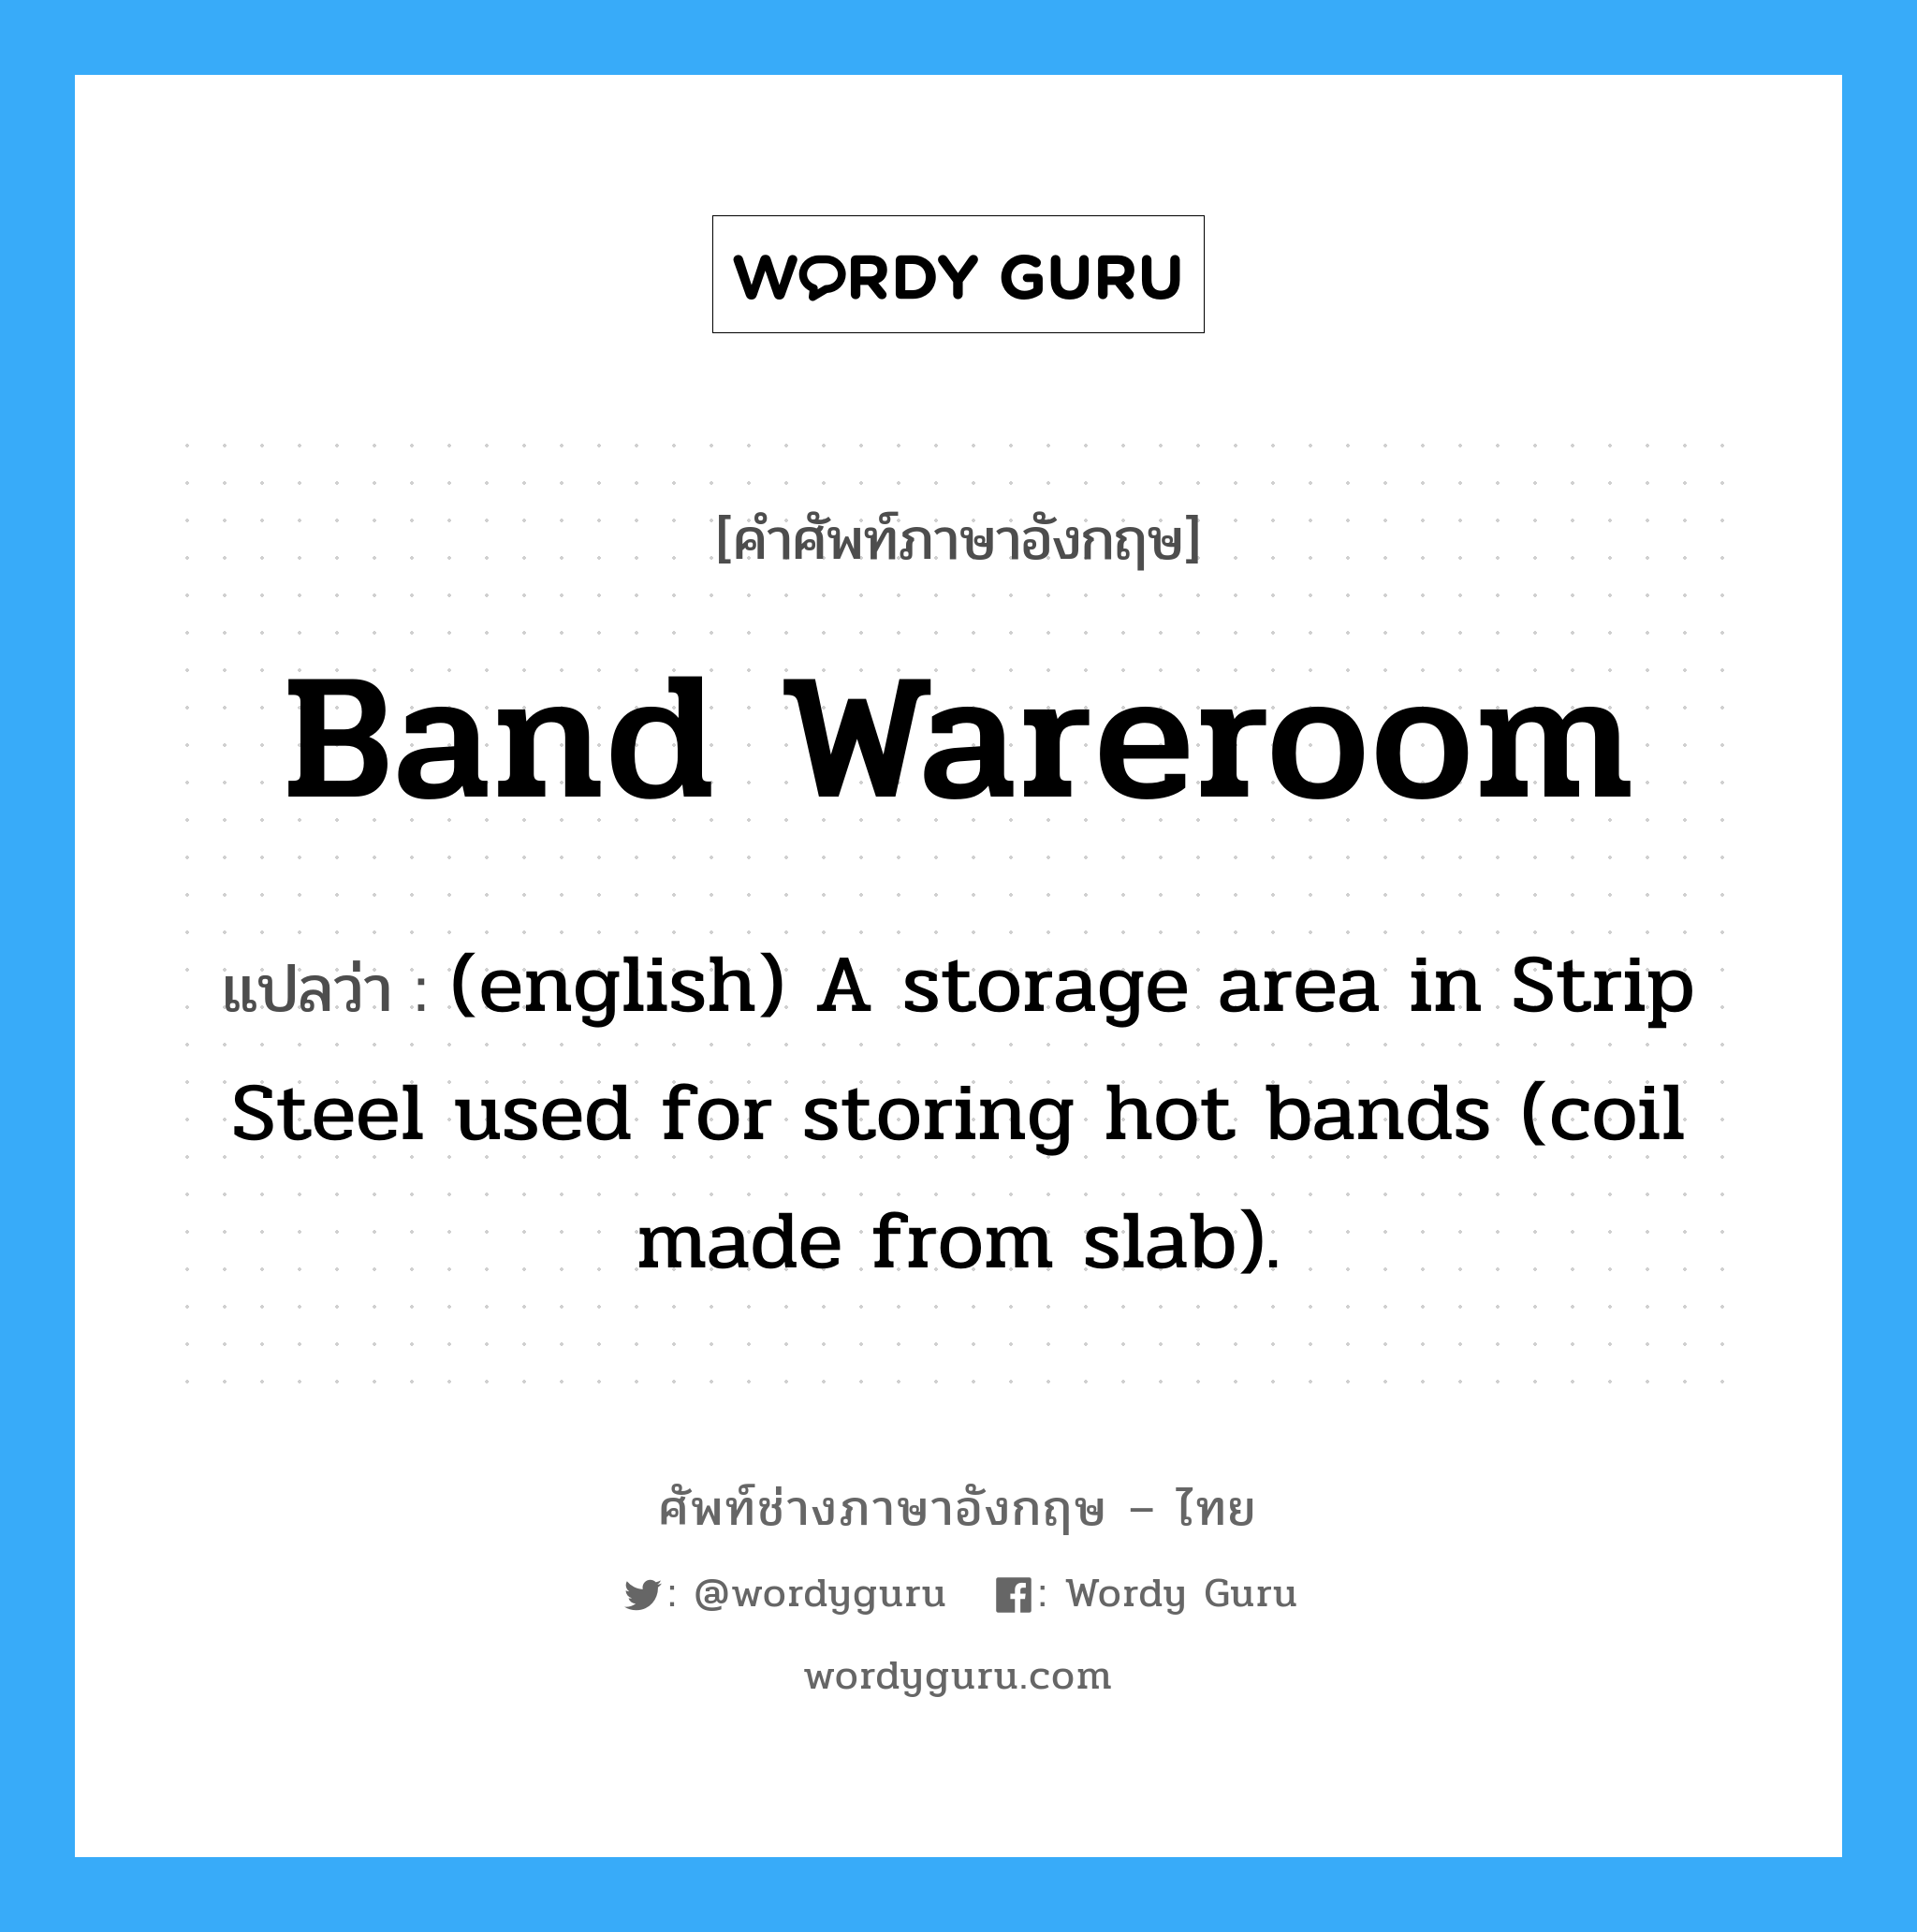 (english) A storage area in Strip Steel used for storing hot bands (coil made from slab). ภาษาอังกฤษ?, คำศัพท์ช่างภาษาอังกฤษ - ไทย (english) A storage area in Strip Steel used for storing hot bands (coil made from slab). คำศัพท์ภาษาอังกฤษ (english) A storage area in Strip Steel used for storing hot bands (coil made from slab). แปลว่า Band Wareroom